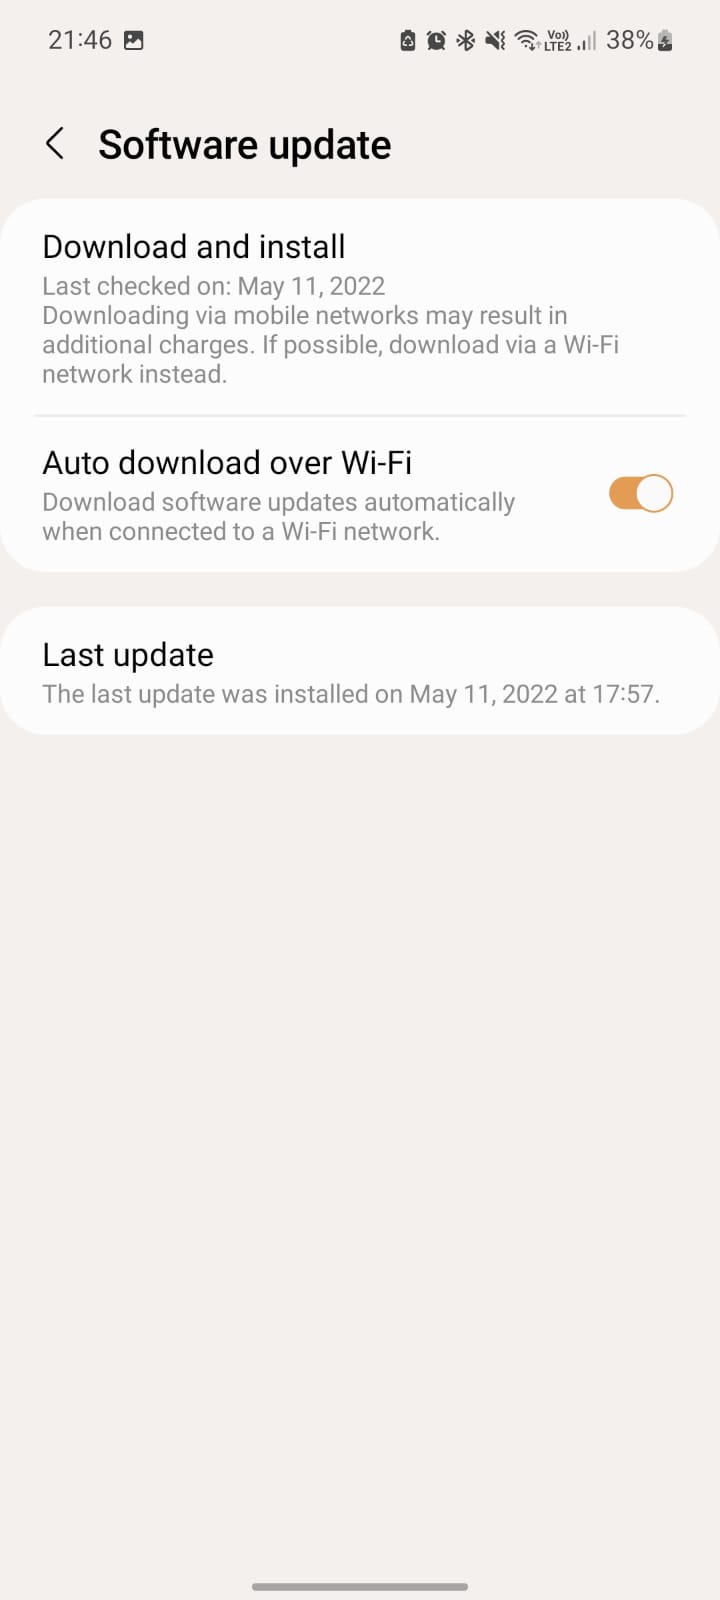 Make Sure your Android is Up to Date